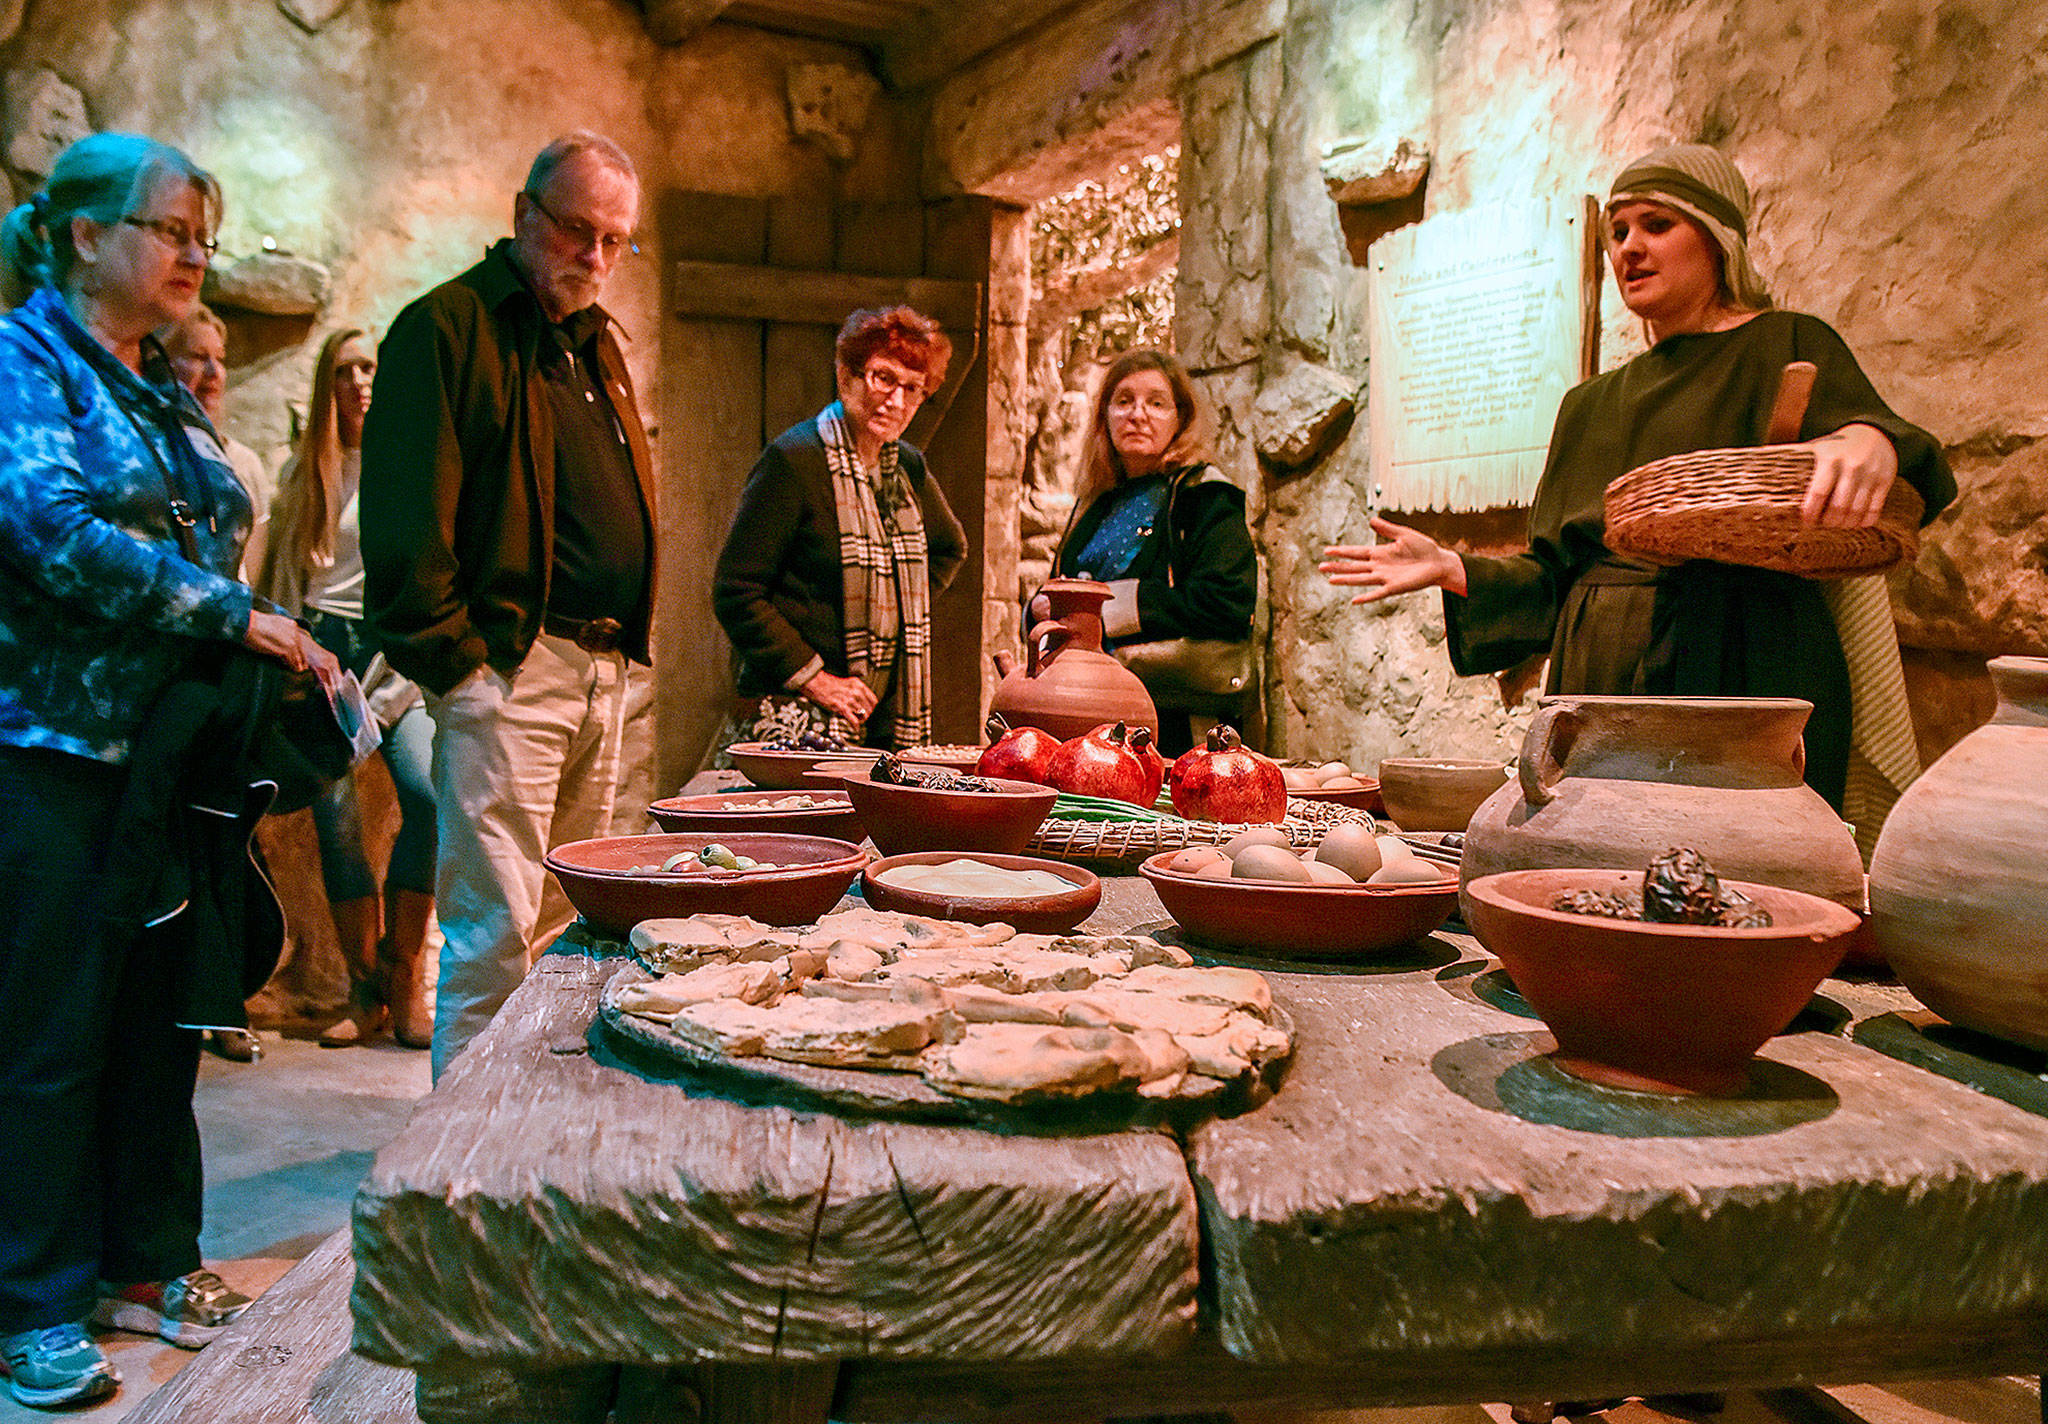 Visitors listen to a living history interpreter at the Museum of the Bible. (Washington Post/Bill O’Leary )